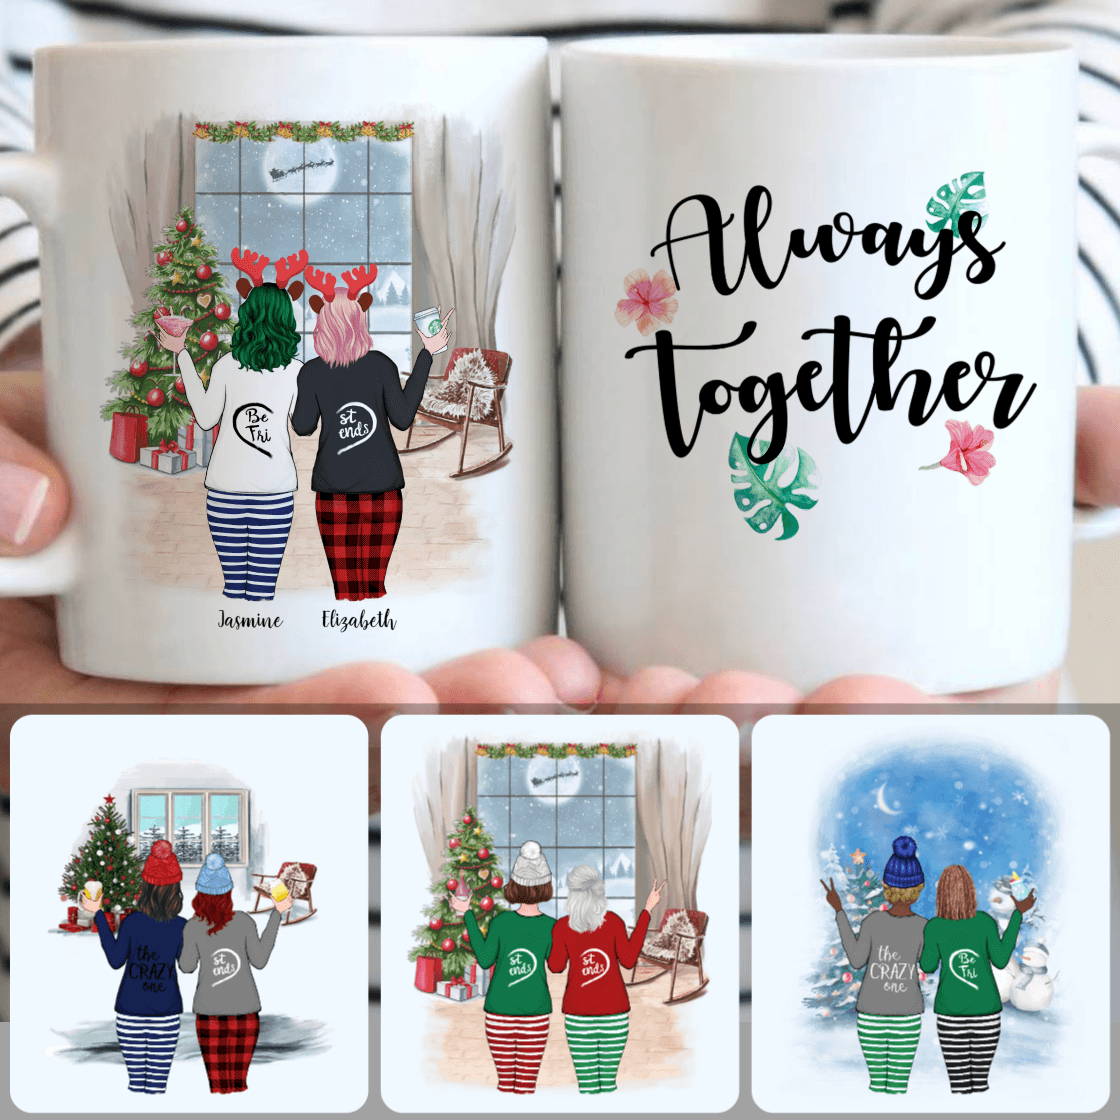 Personalized Mug, Unique Christmas Gifts, 2 Best Friends - Always Together Customized Coffee Mug With Names